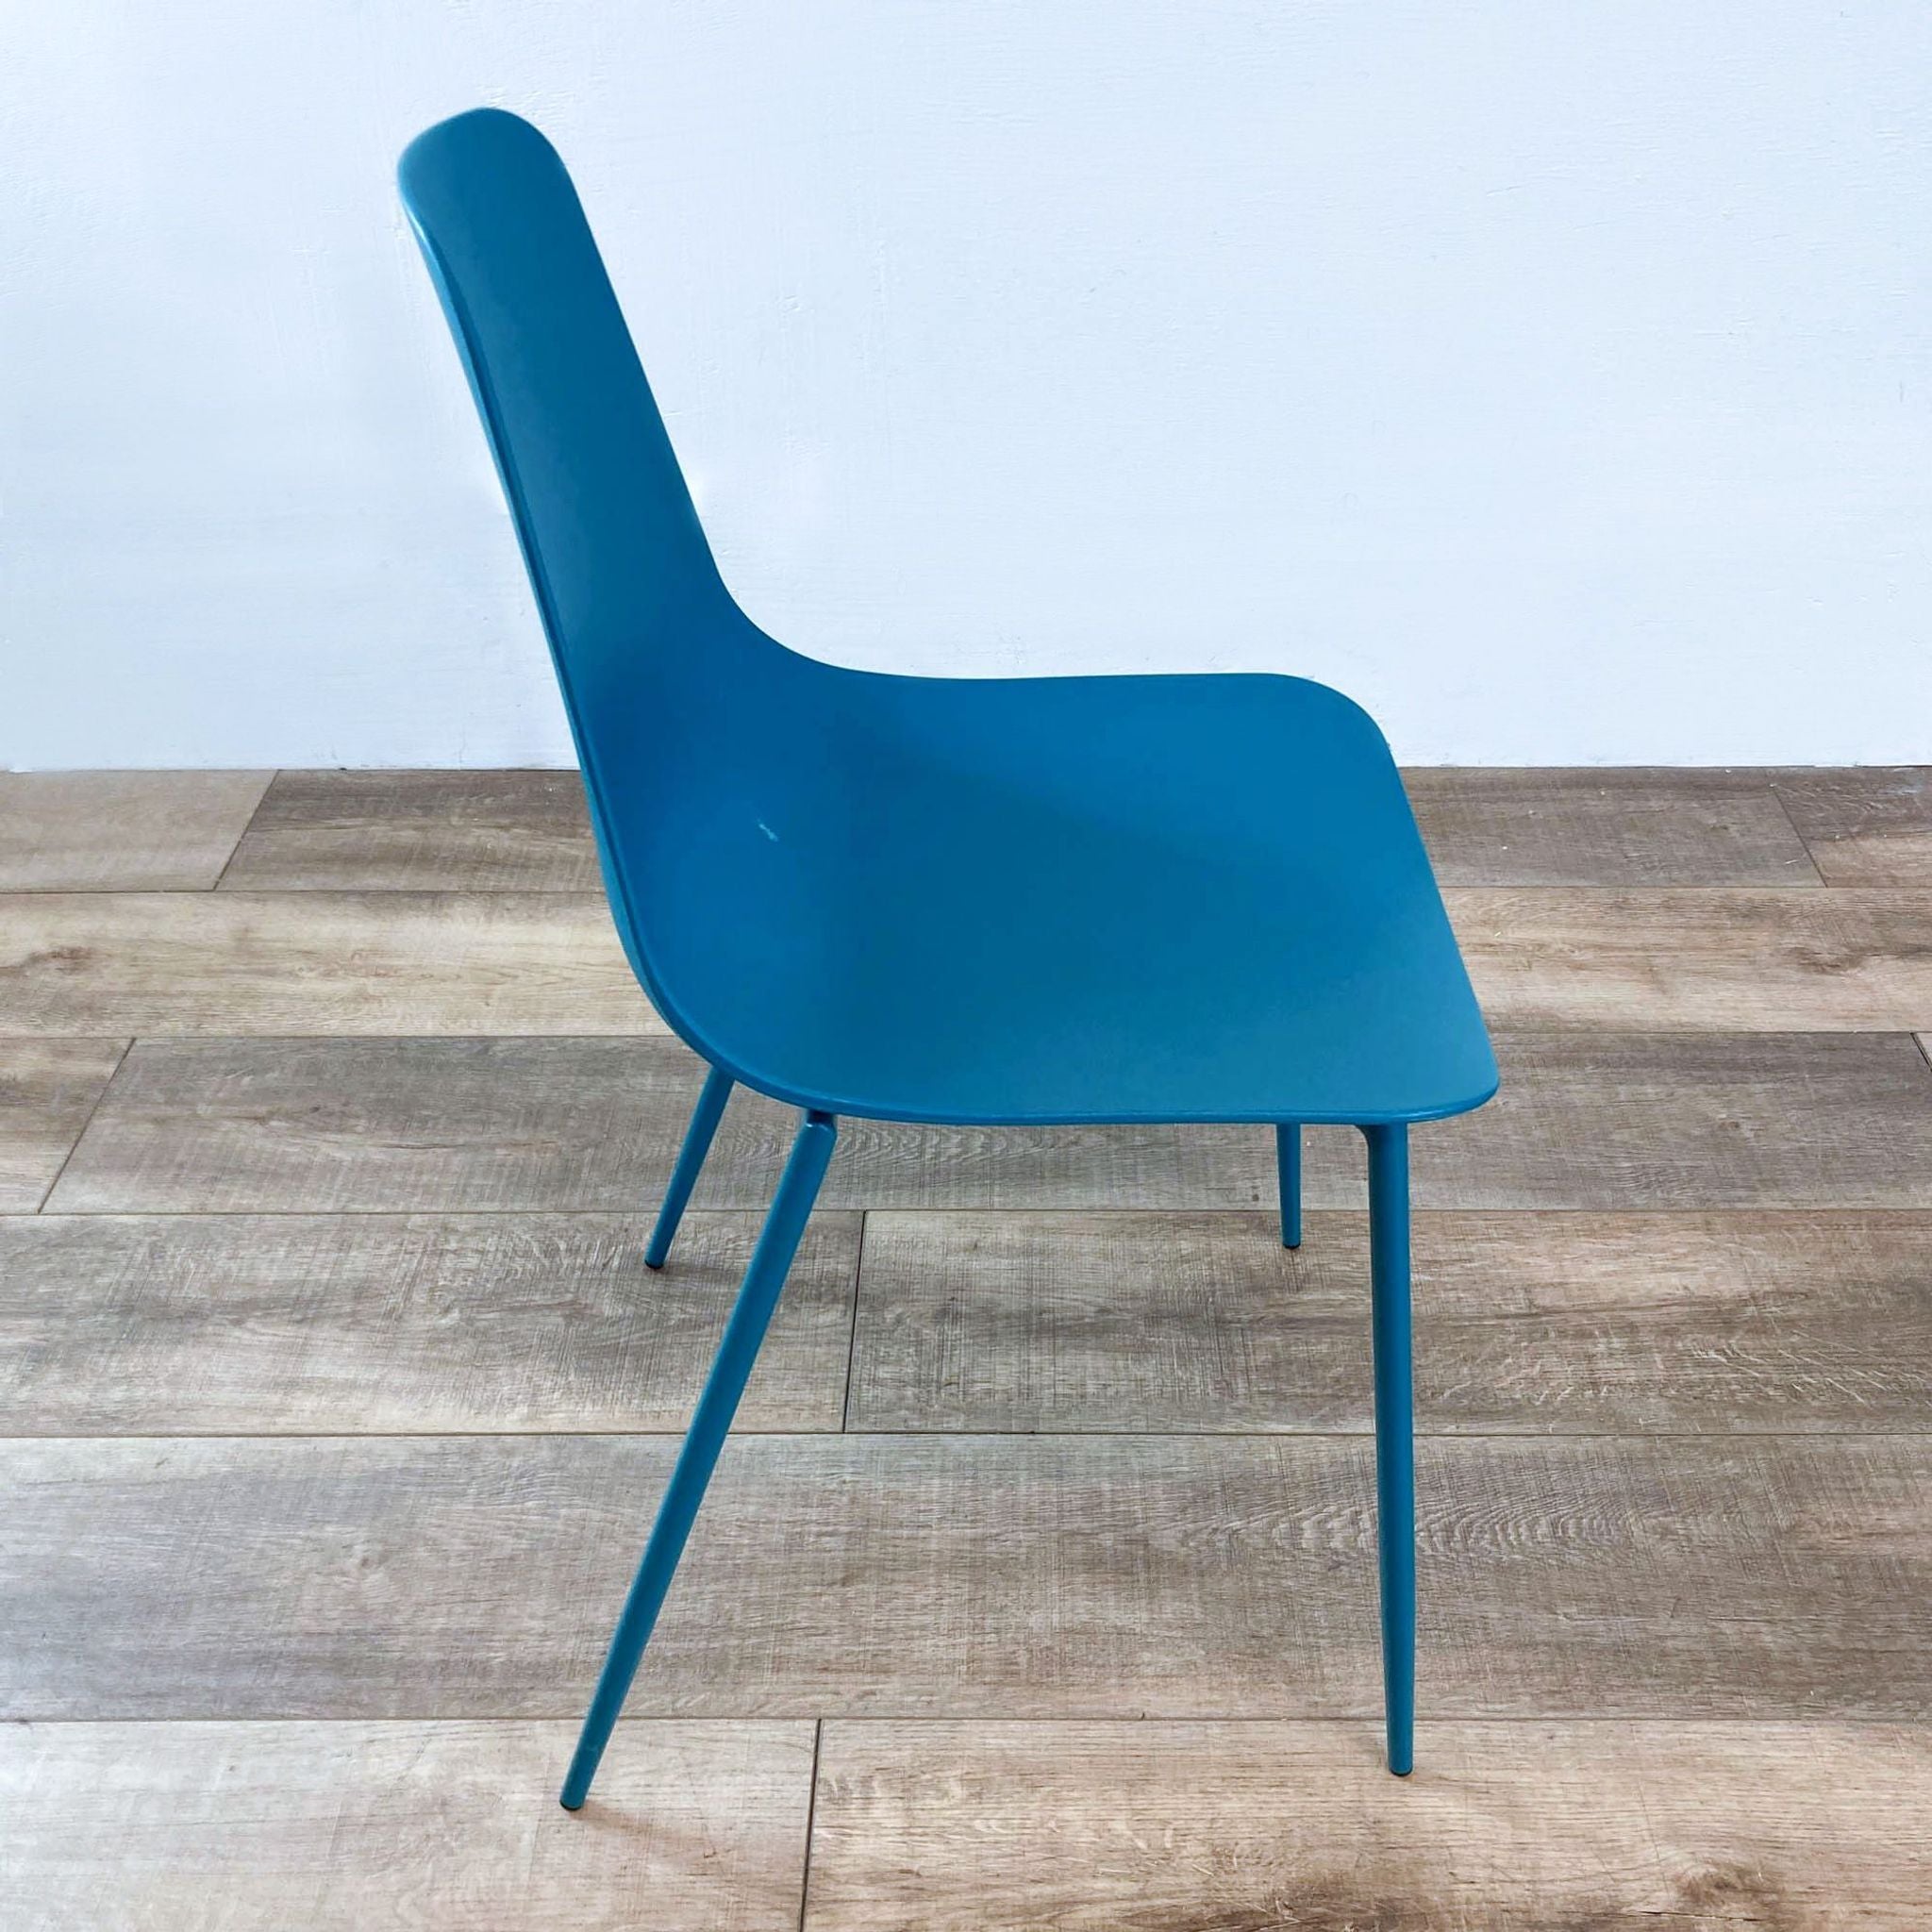 A teal Reperch modern plastic moulded chair with sleek metal legs, on a wooden floor against a white wall.